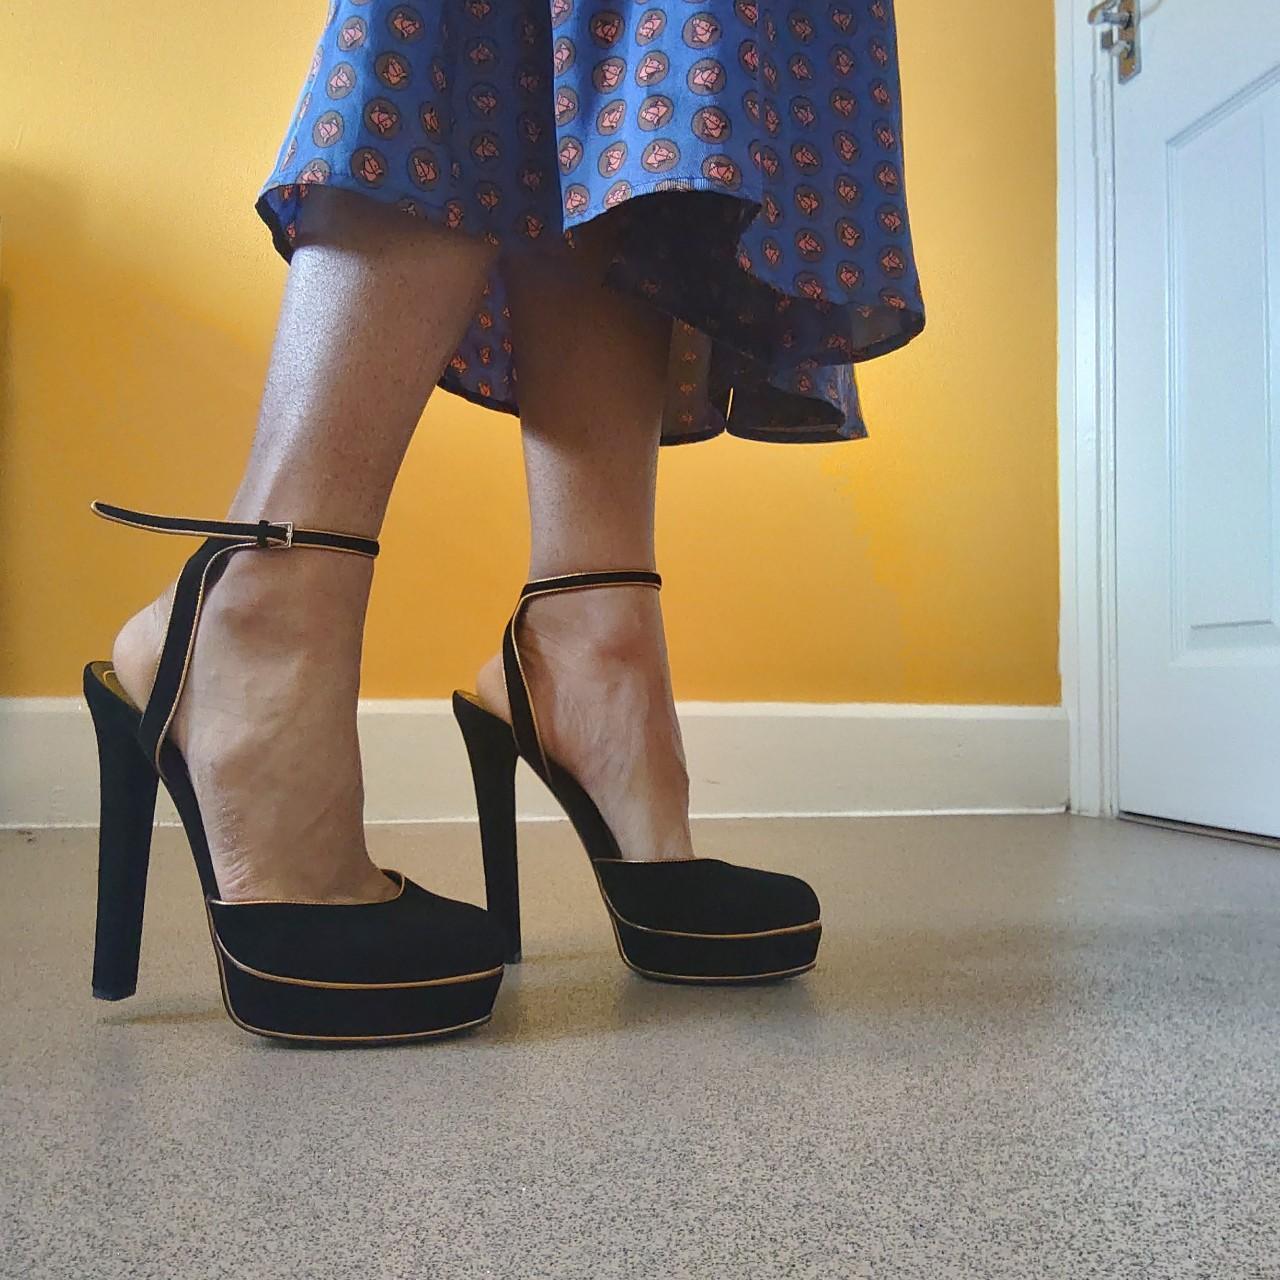 Amazing suede Gucci heels with an ankle strap and... - Depop